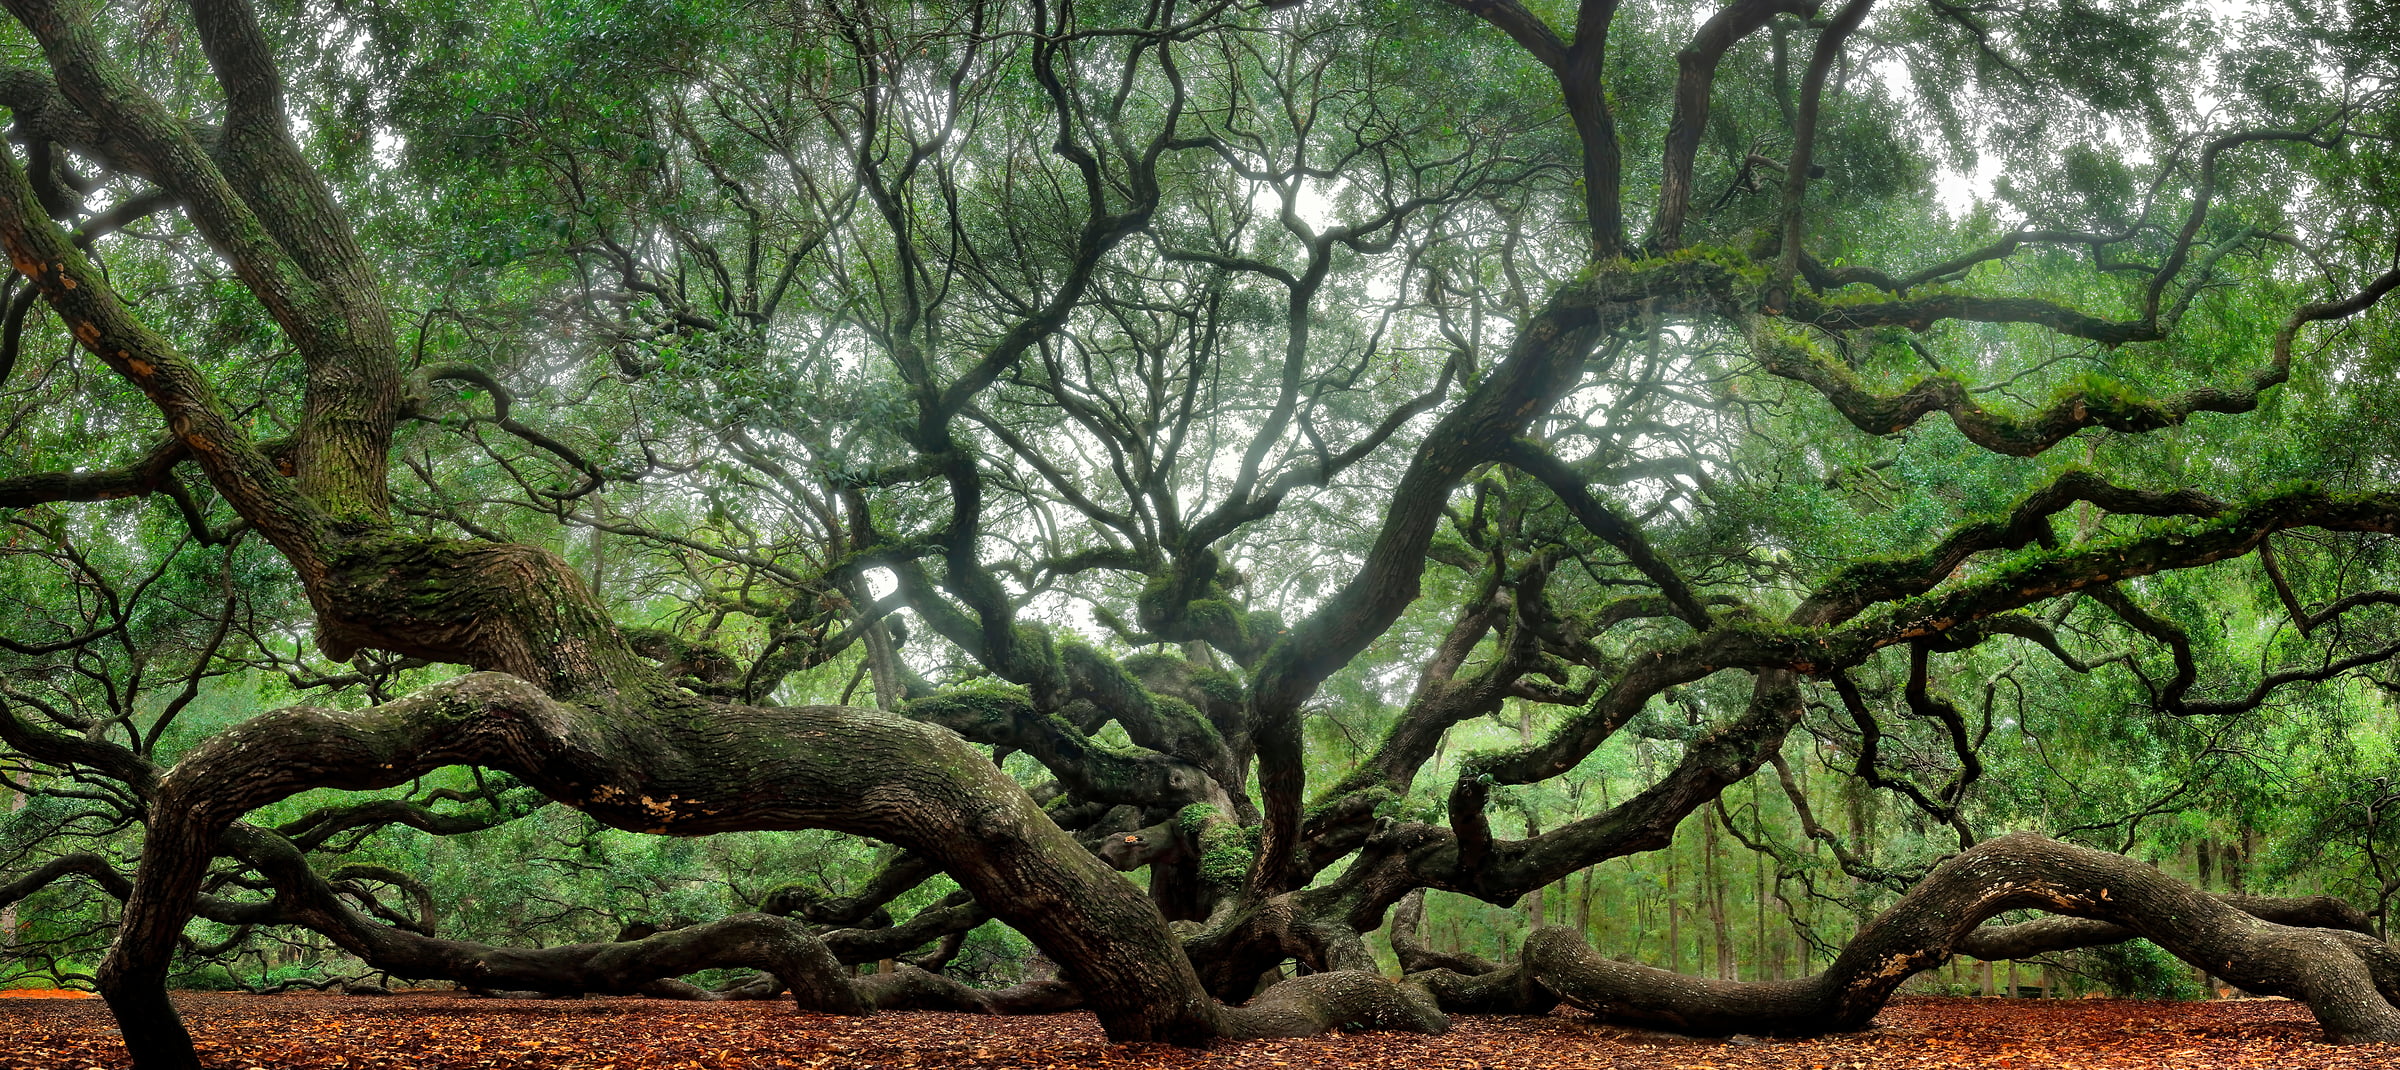 324 megapixels! A very high resolution, large-format VAST photo print of a beautiful tree; photograph created by Phil Crawshay in Angel Oak, Charleston, South Carolina.